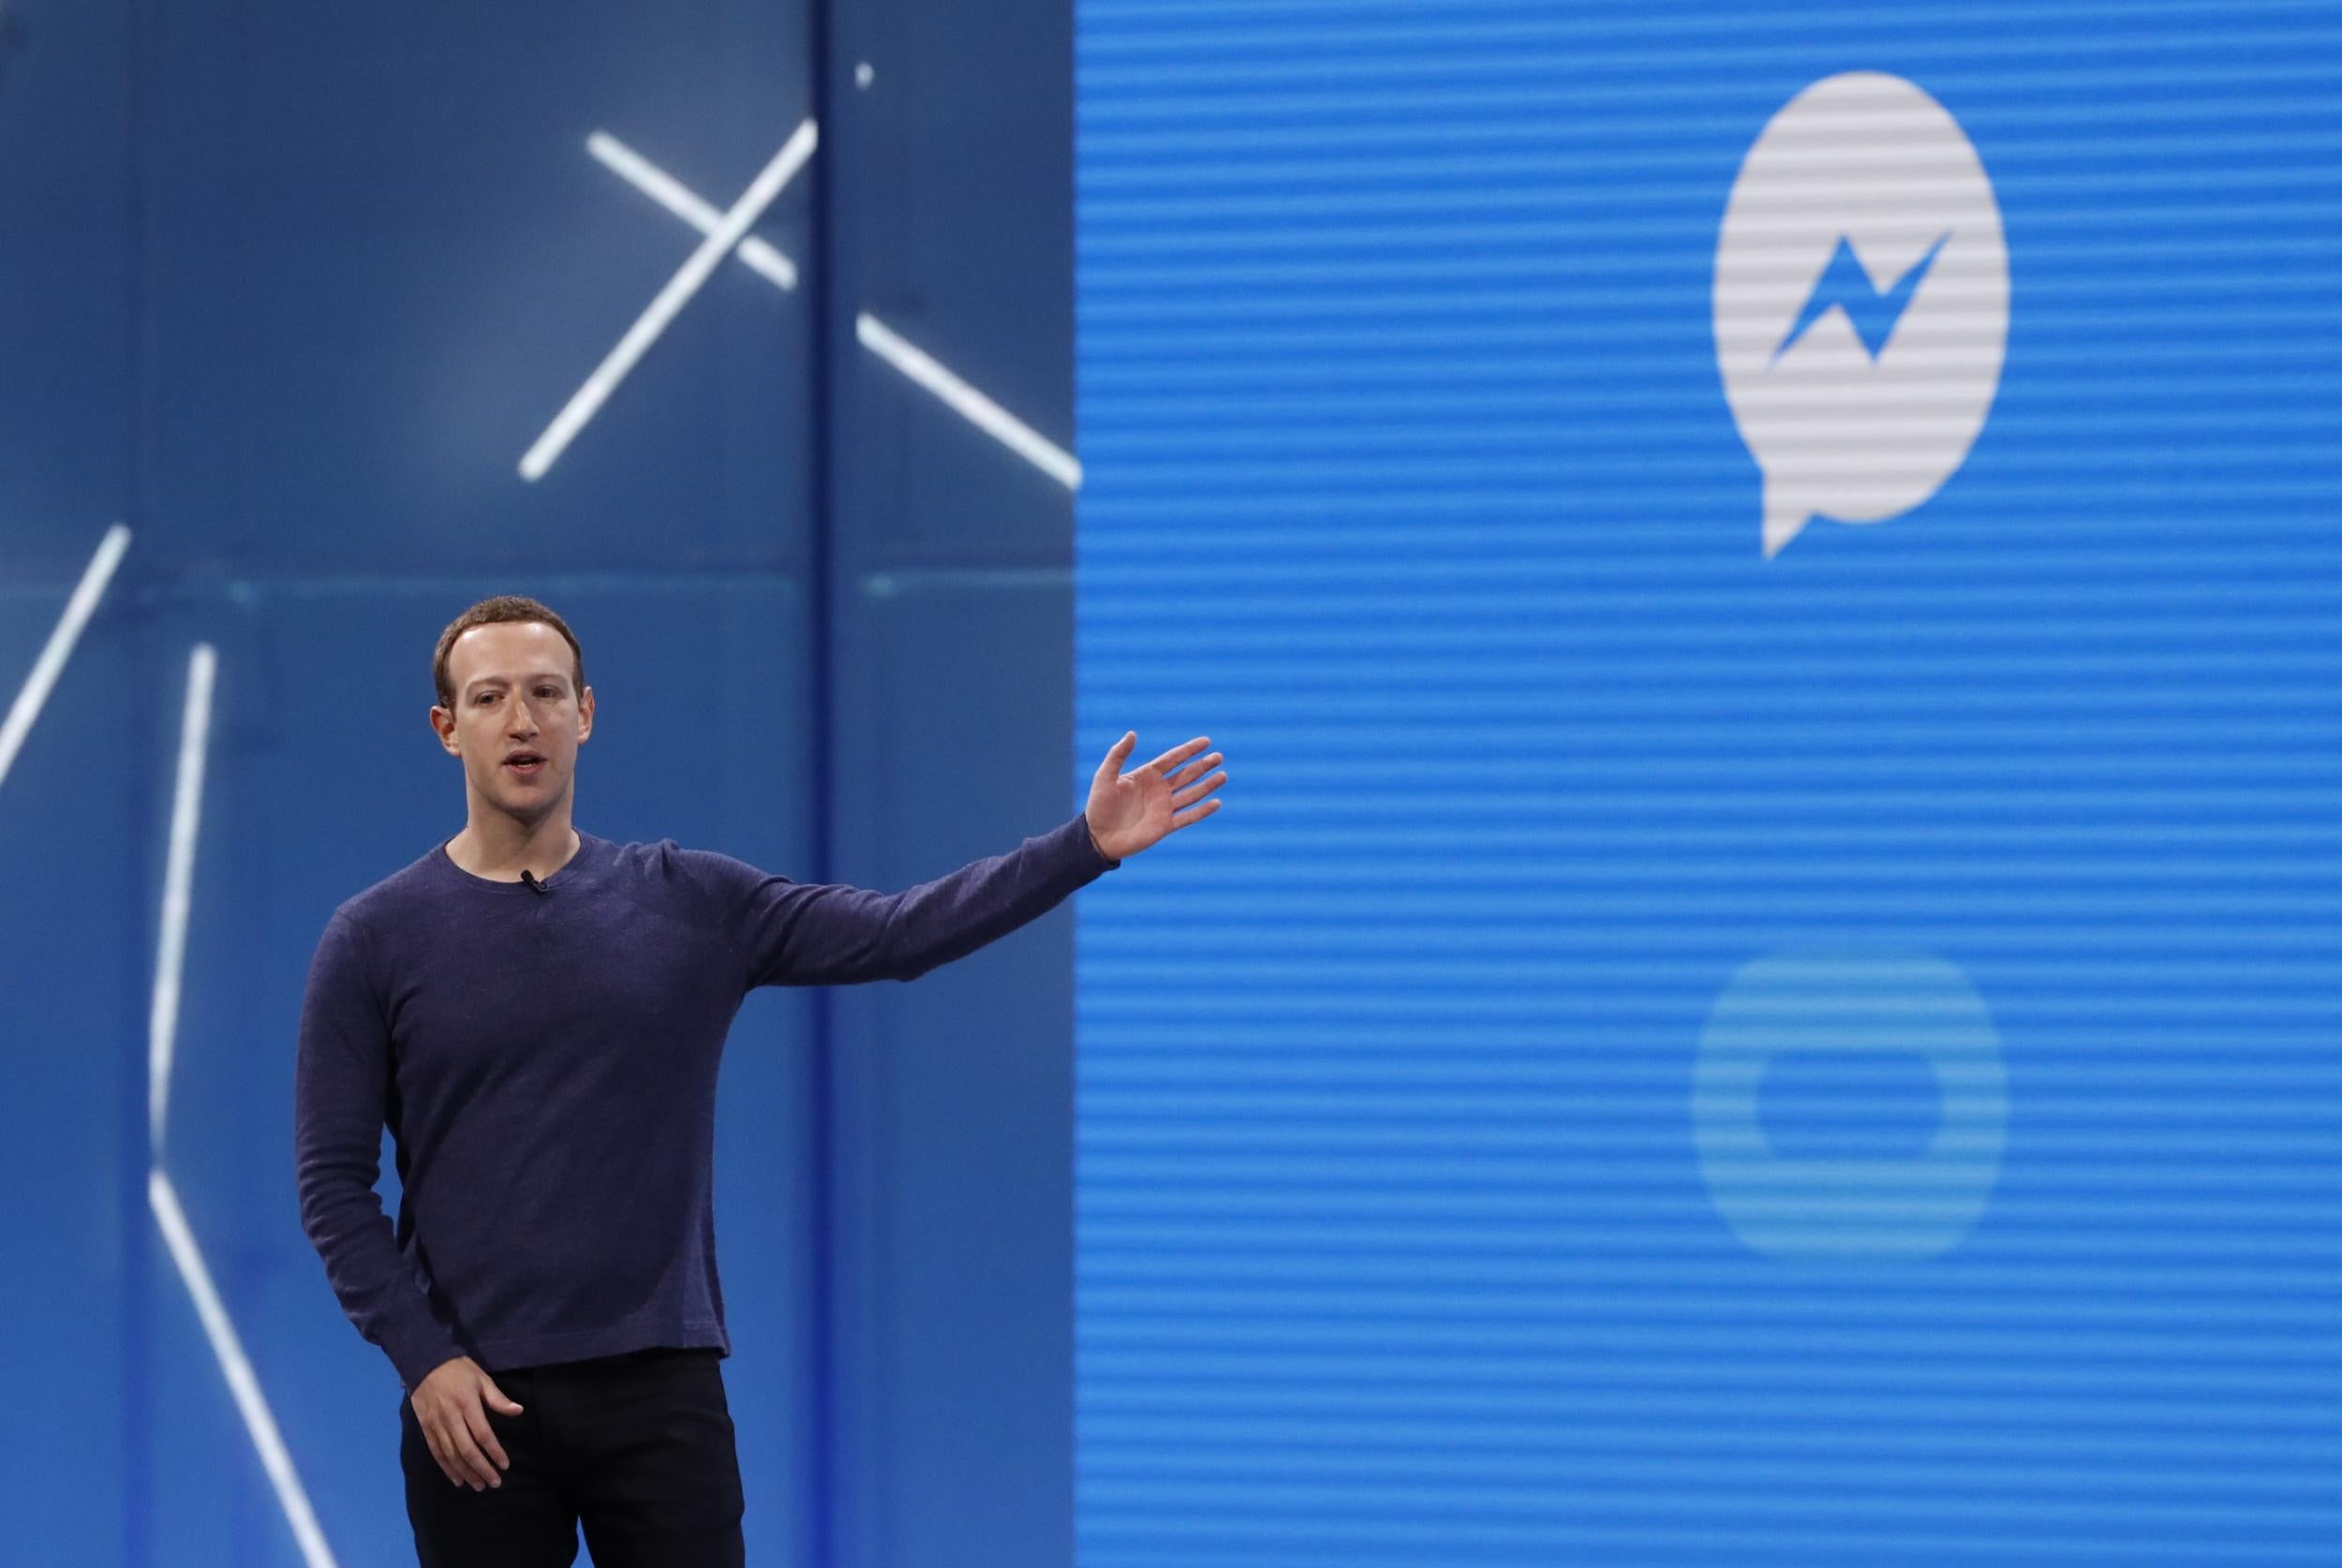 Facebook CEO Mark Zuckerberg speaks about Messenger at Facebook's F8 conference in California, May 1, 2018